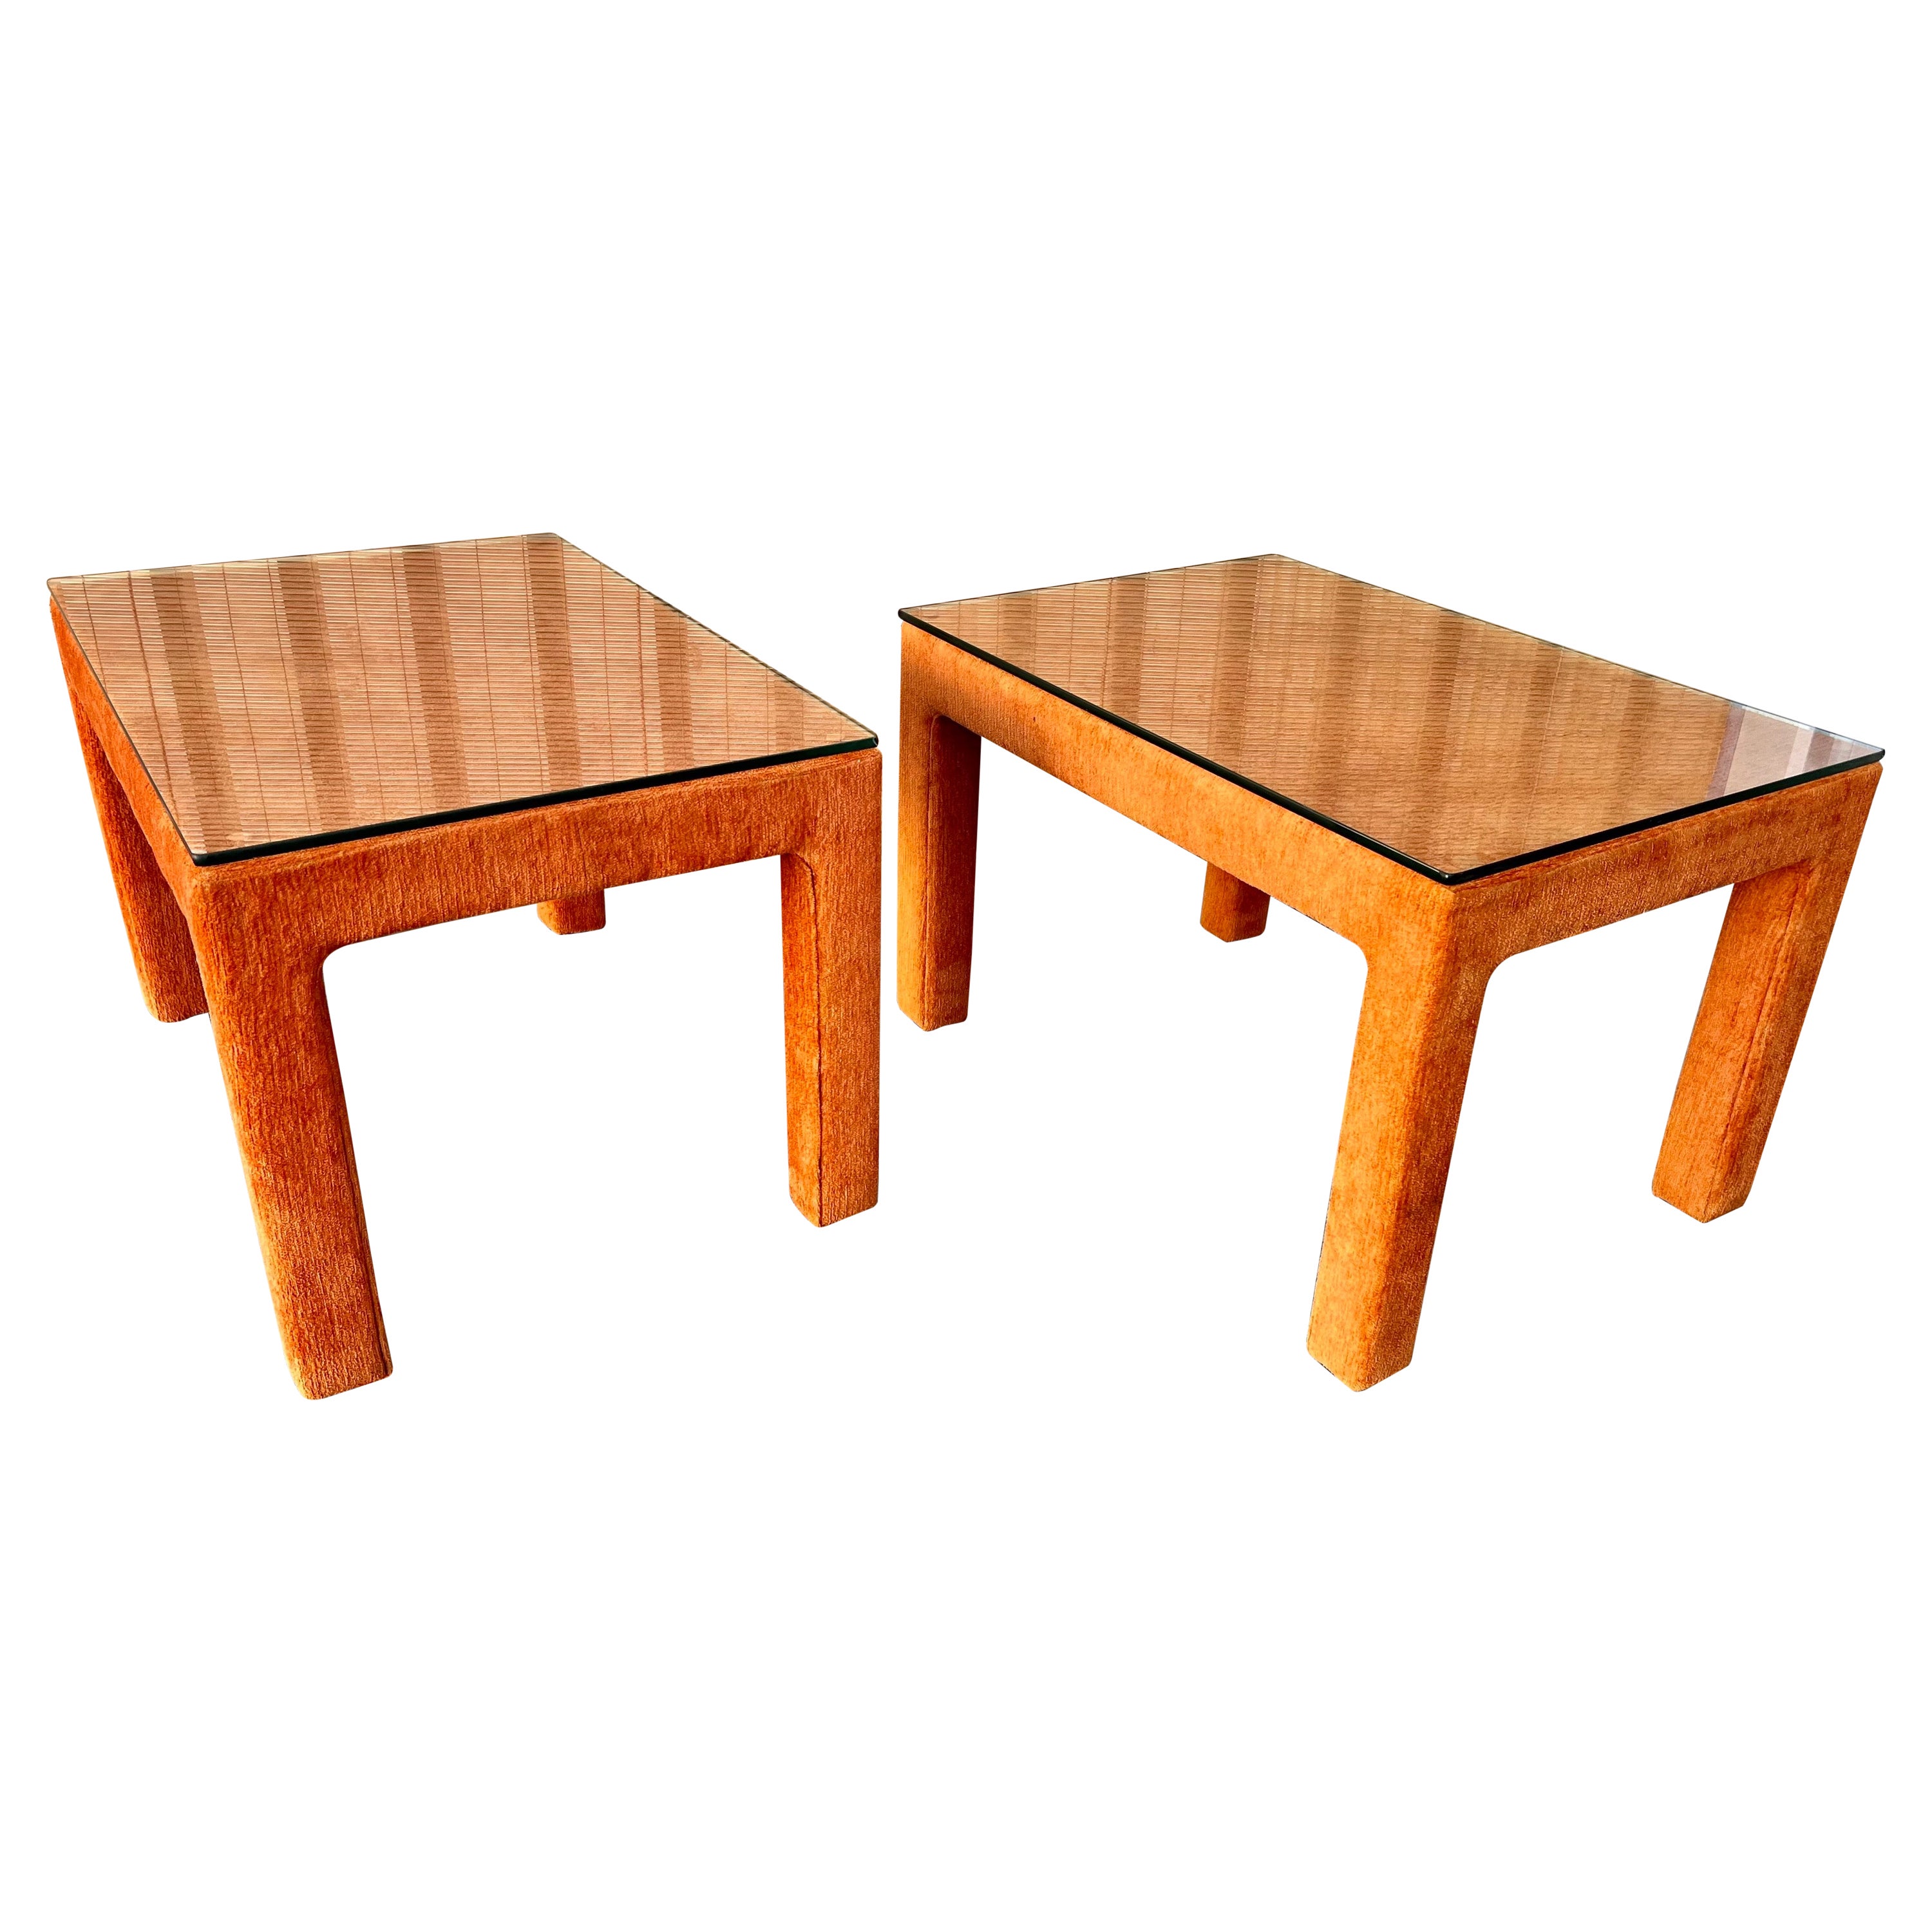 Pair of Mid-Century Modern Fully Upholstered Side Tables, circa 1970s For Sale